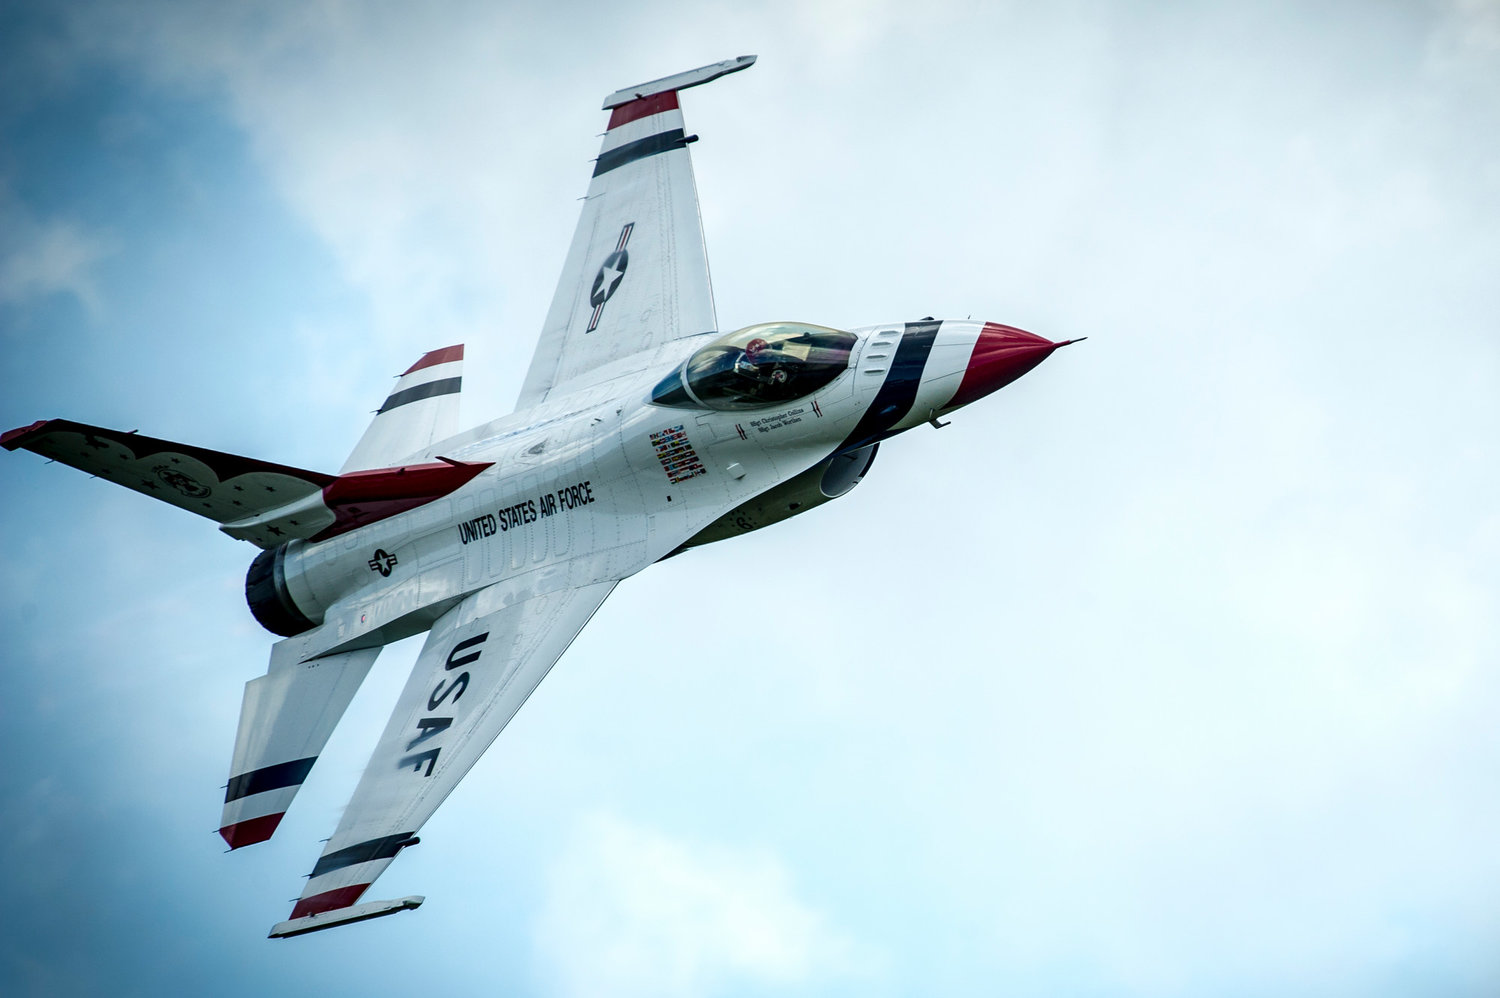 Bethpage Federal Credit Union Air Show to commence Herald Community